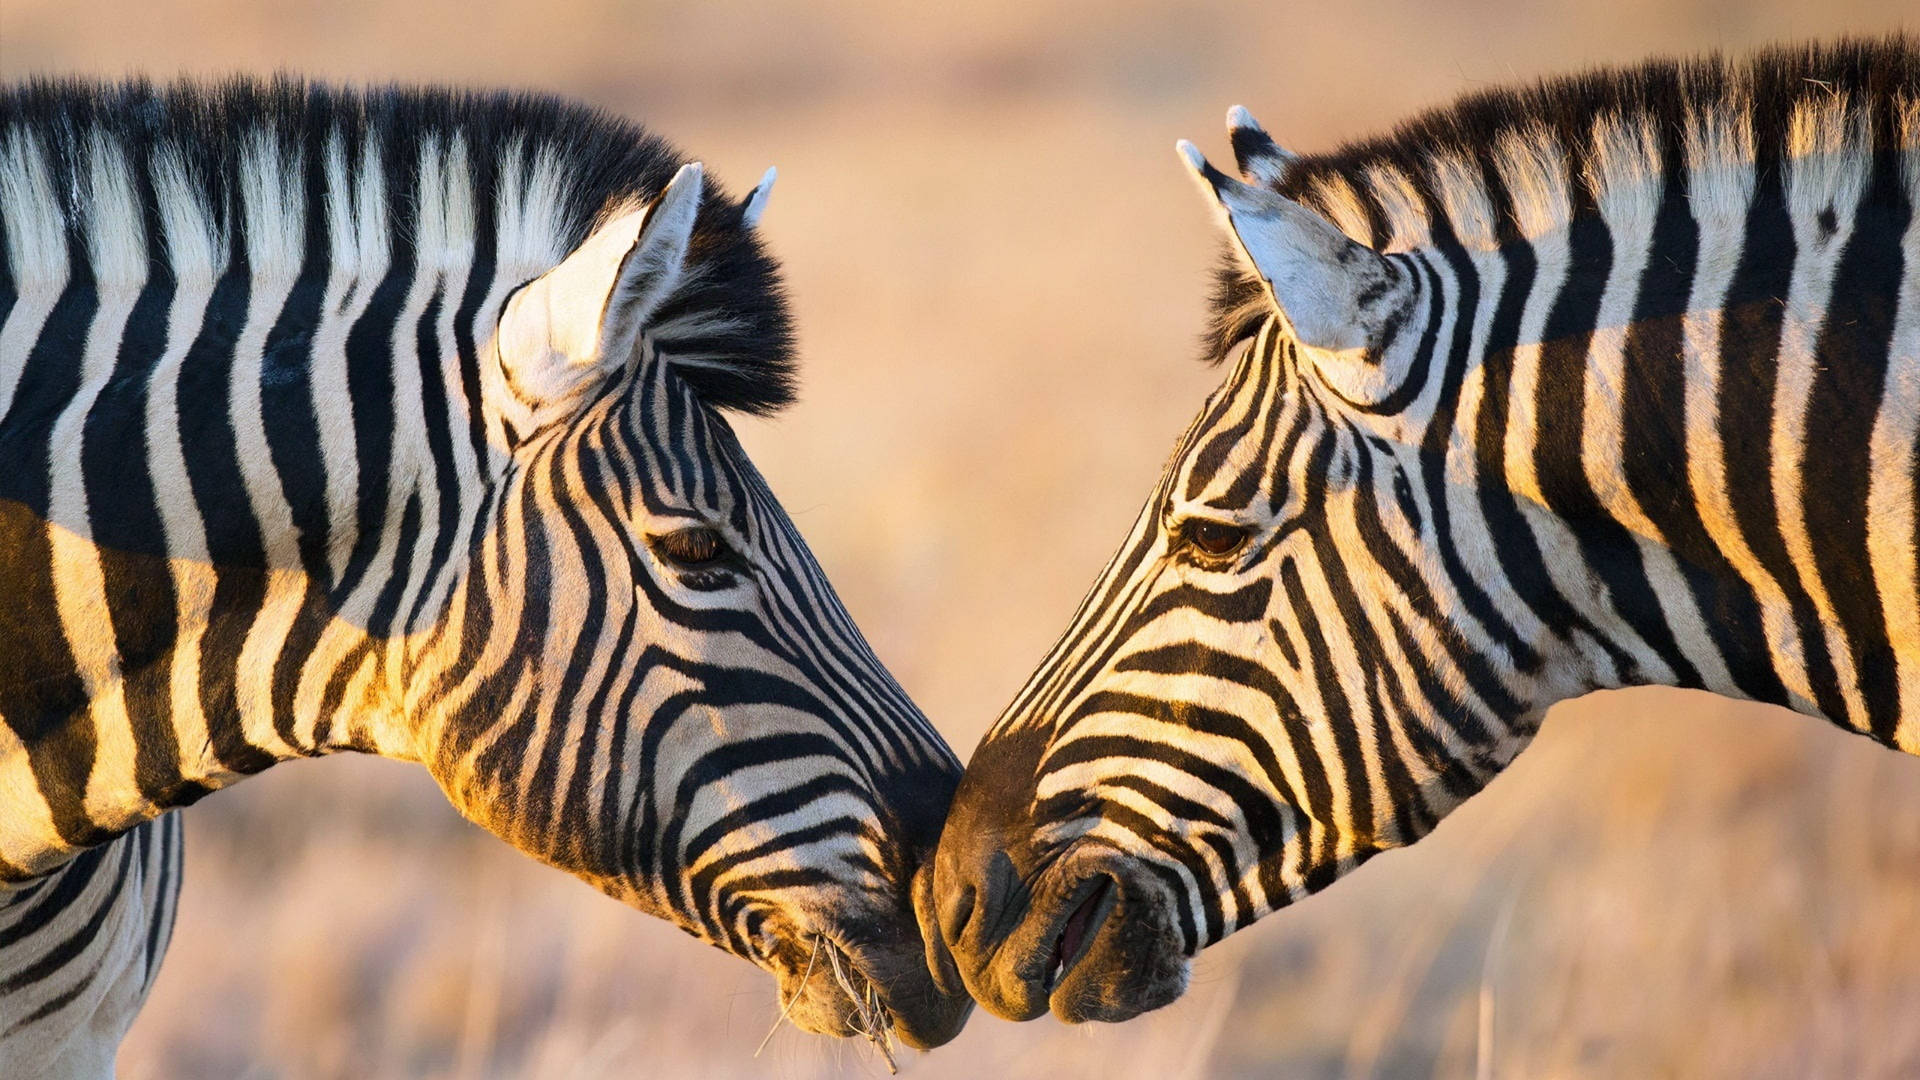 Two Zebras Face To Face